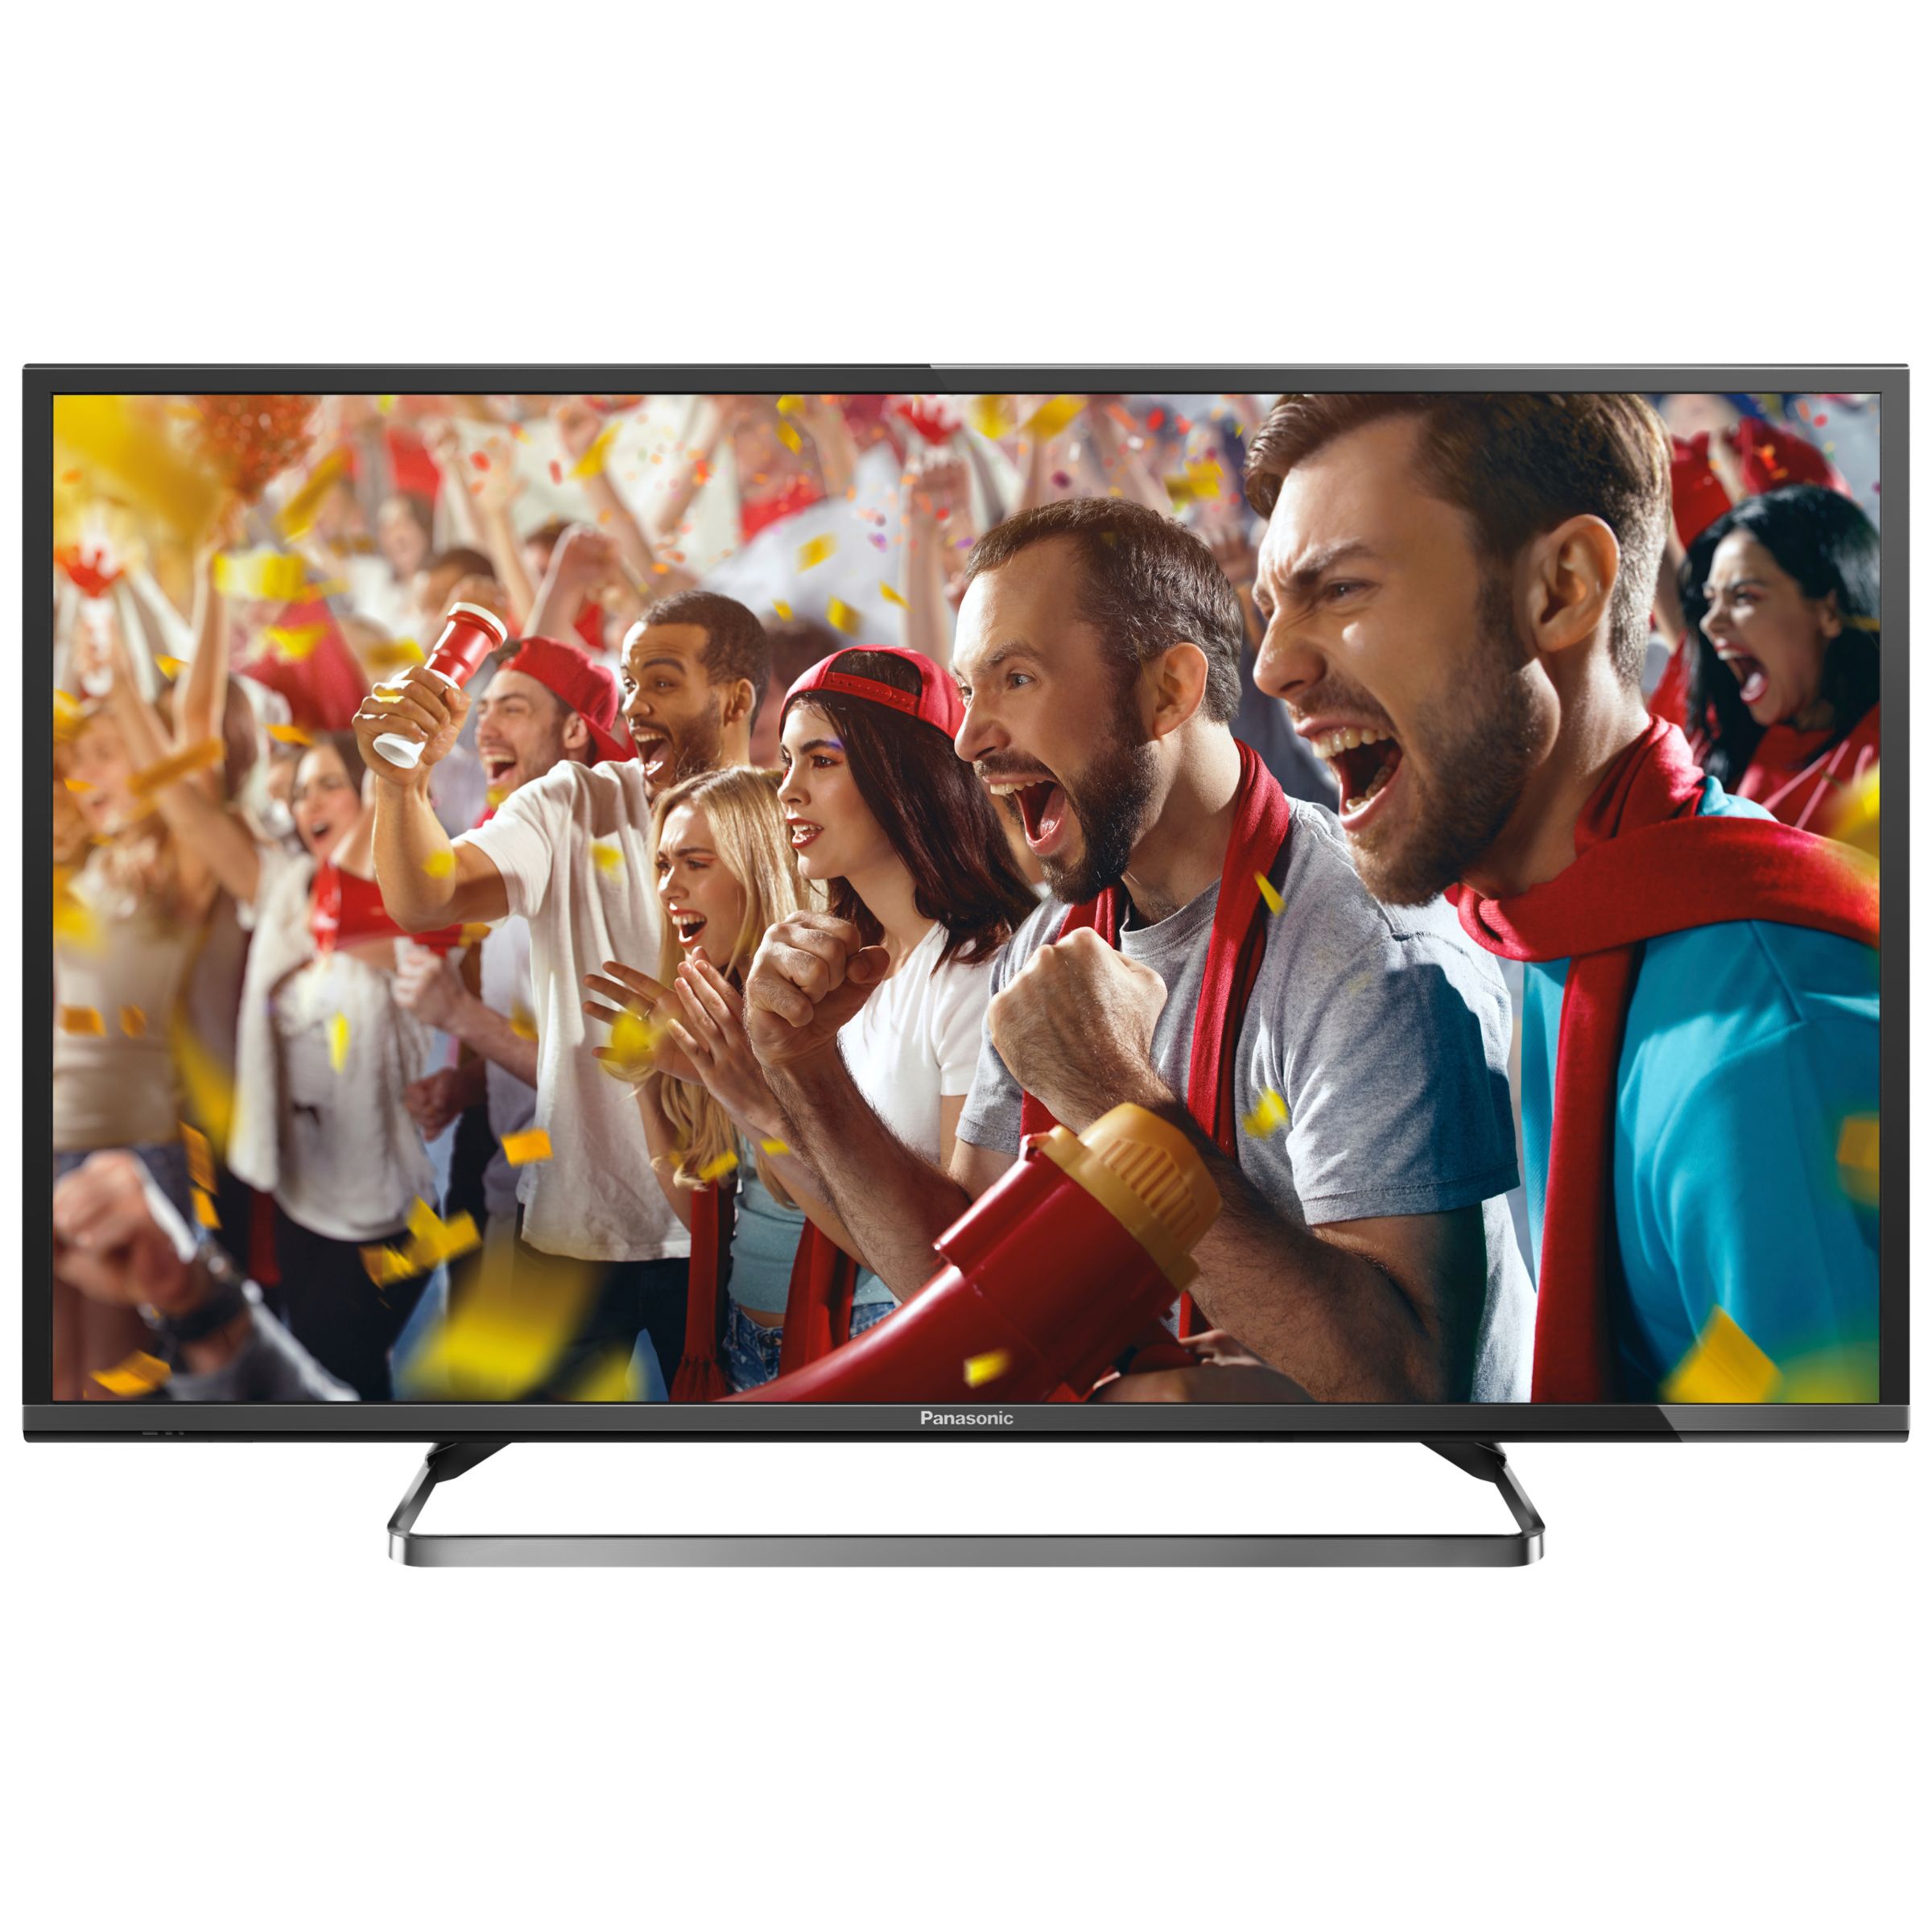 Panasonic TX-40CX680B LED HD Smart TV, 40" with Freeview HD and Wi-Fi